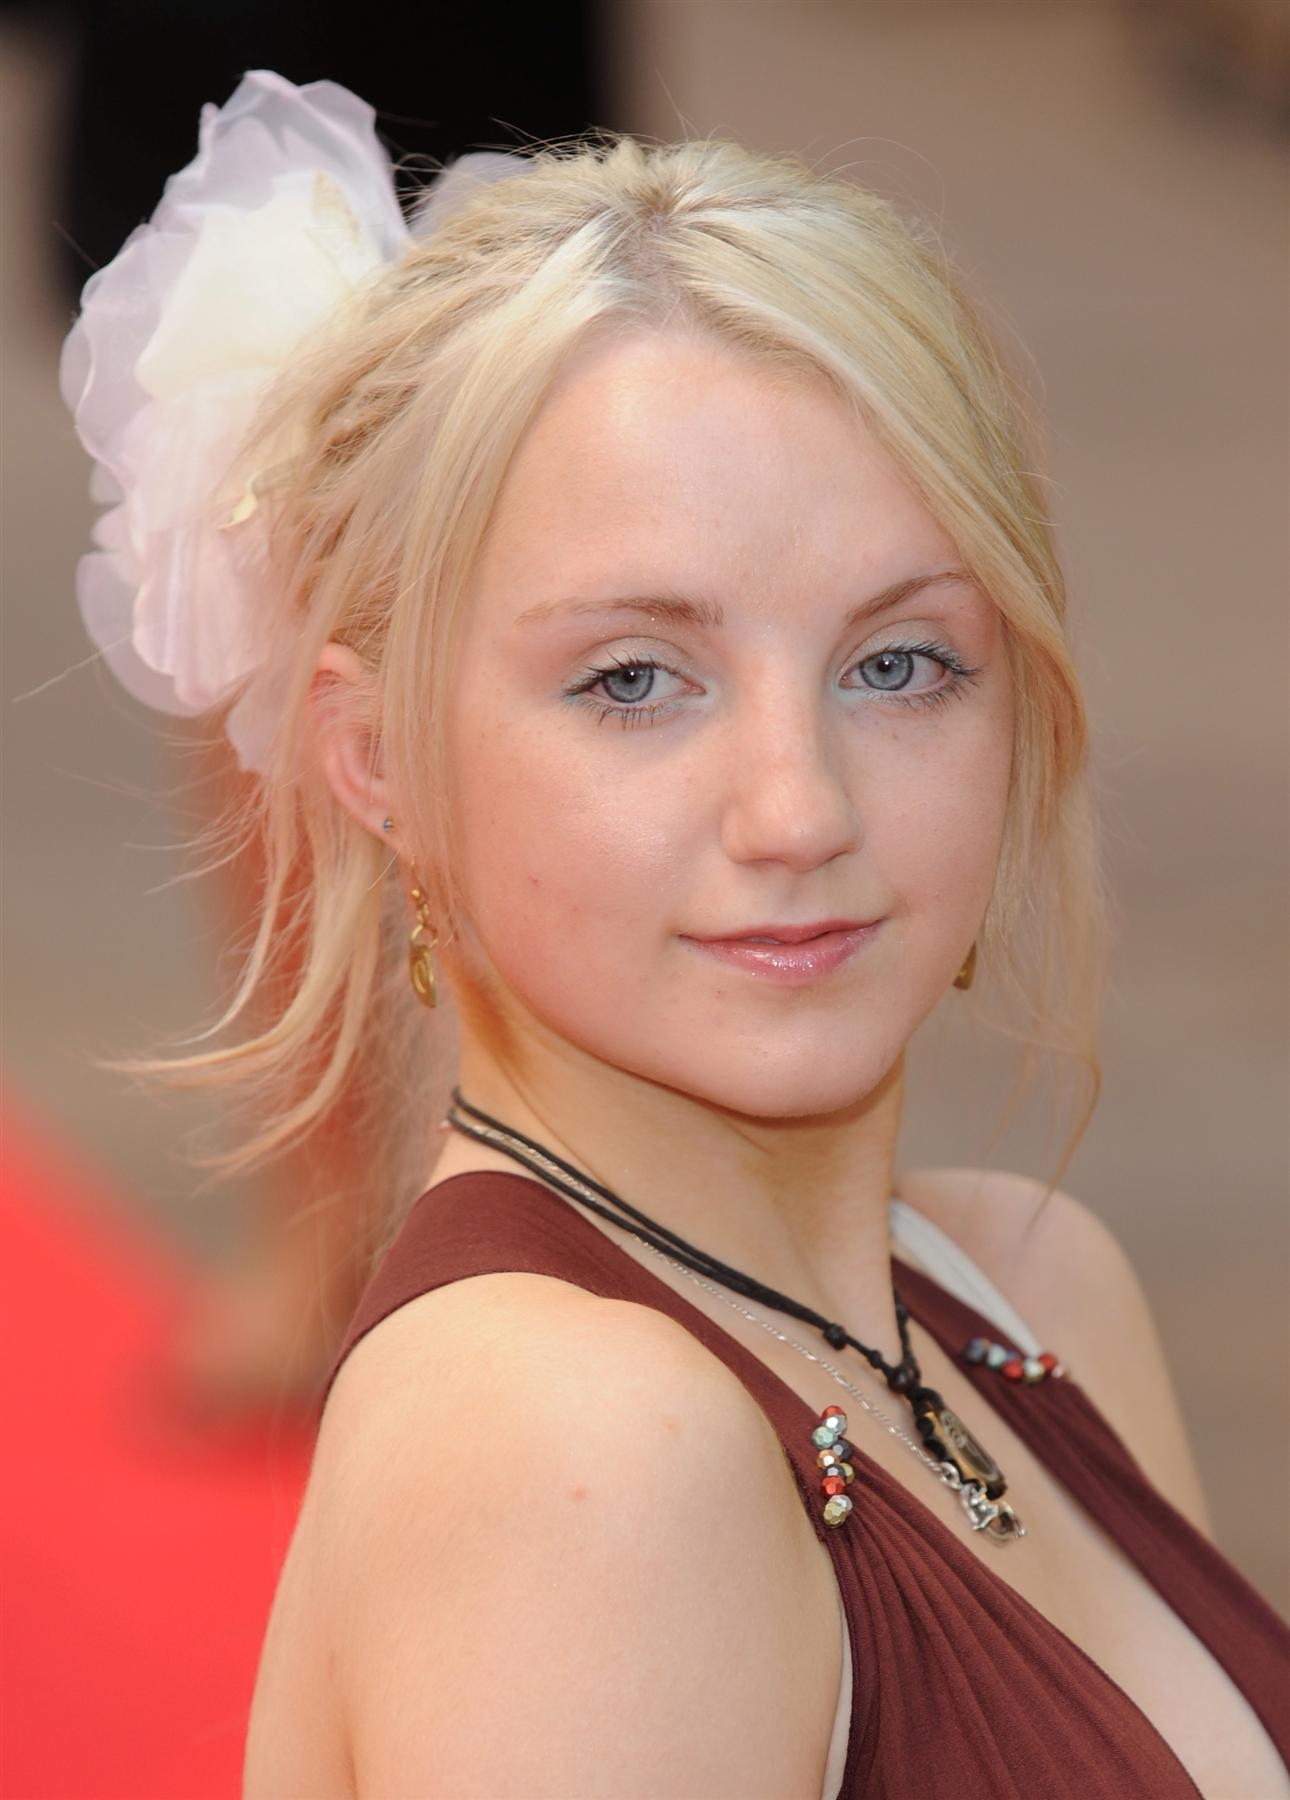 Download Wallpapers Download 1920x1200 evanna lynch